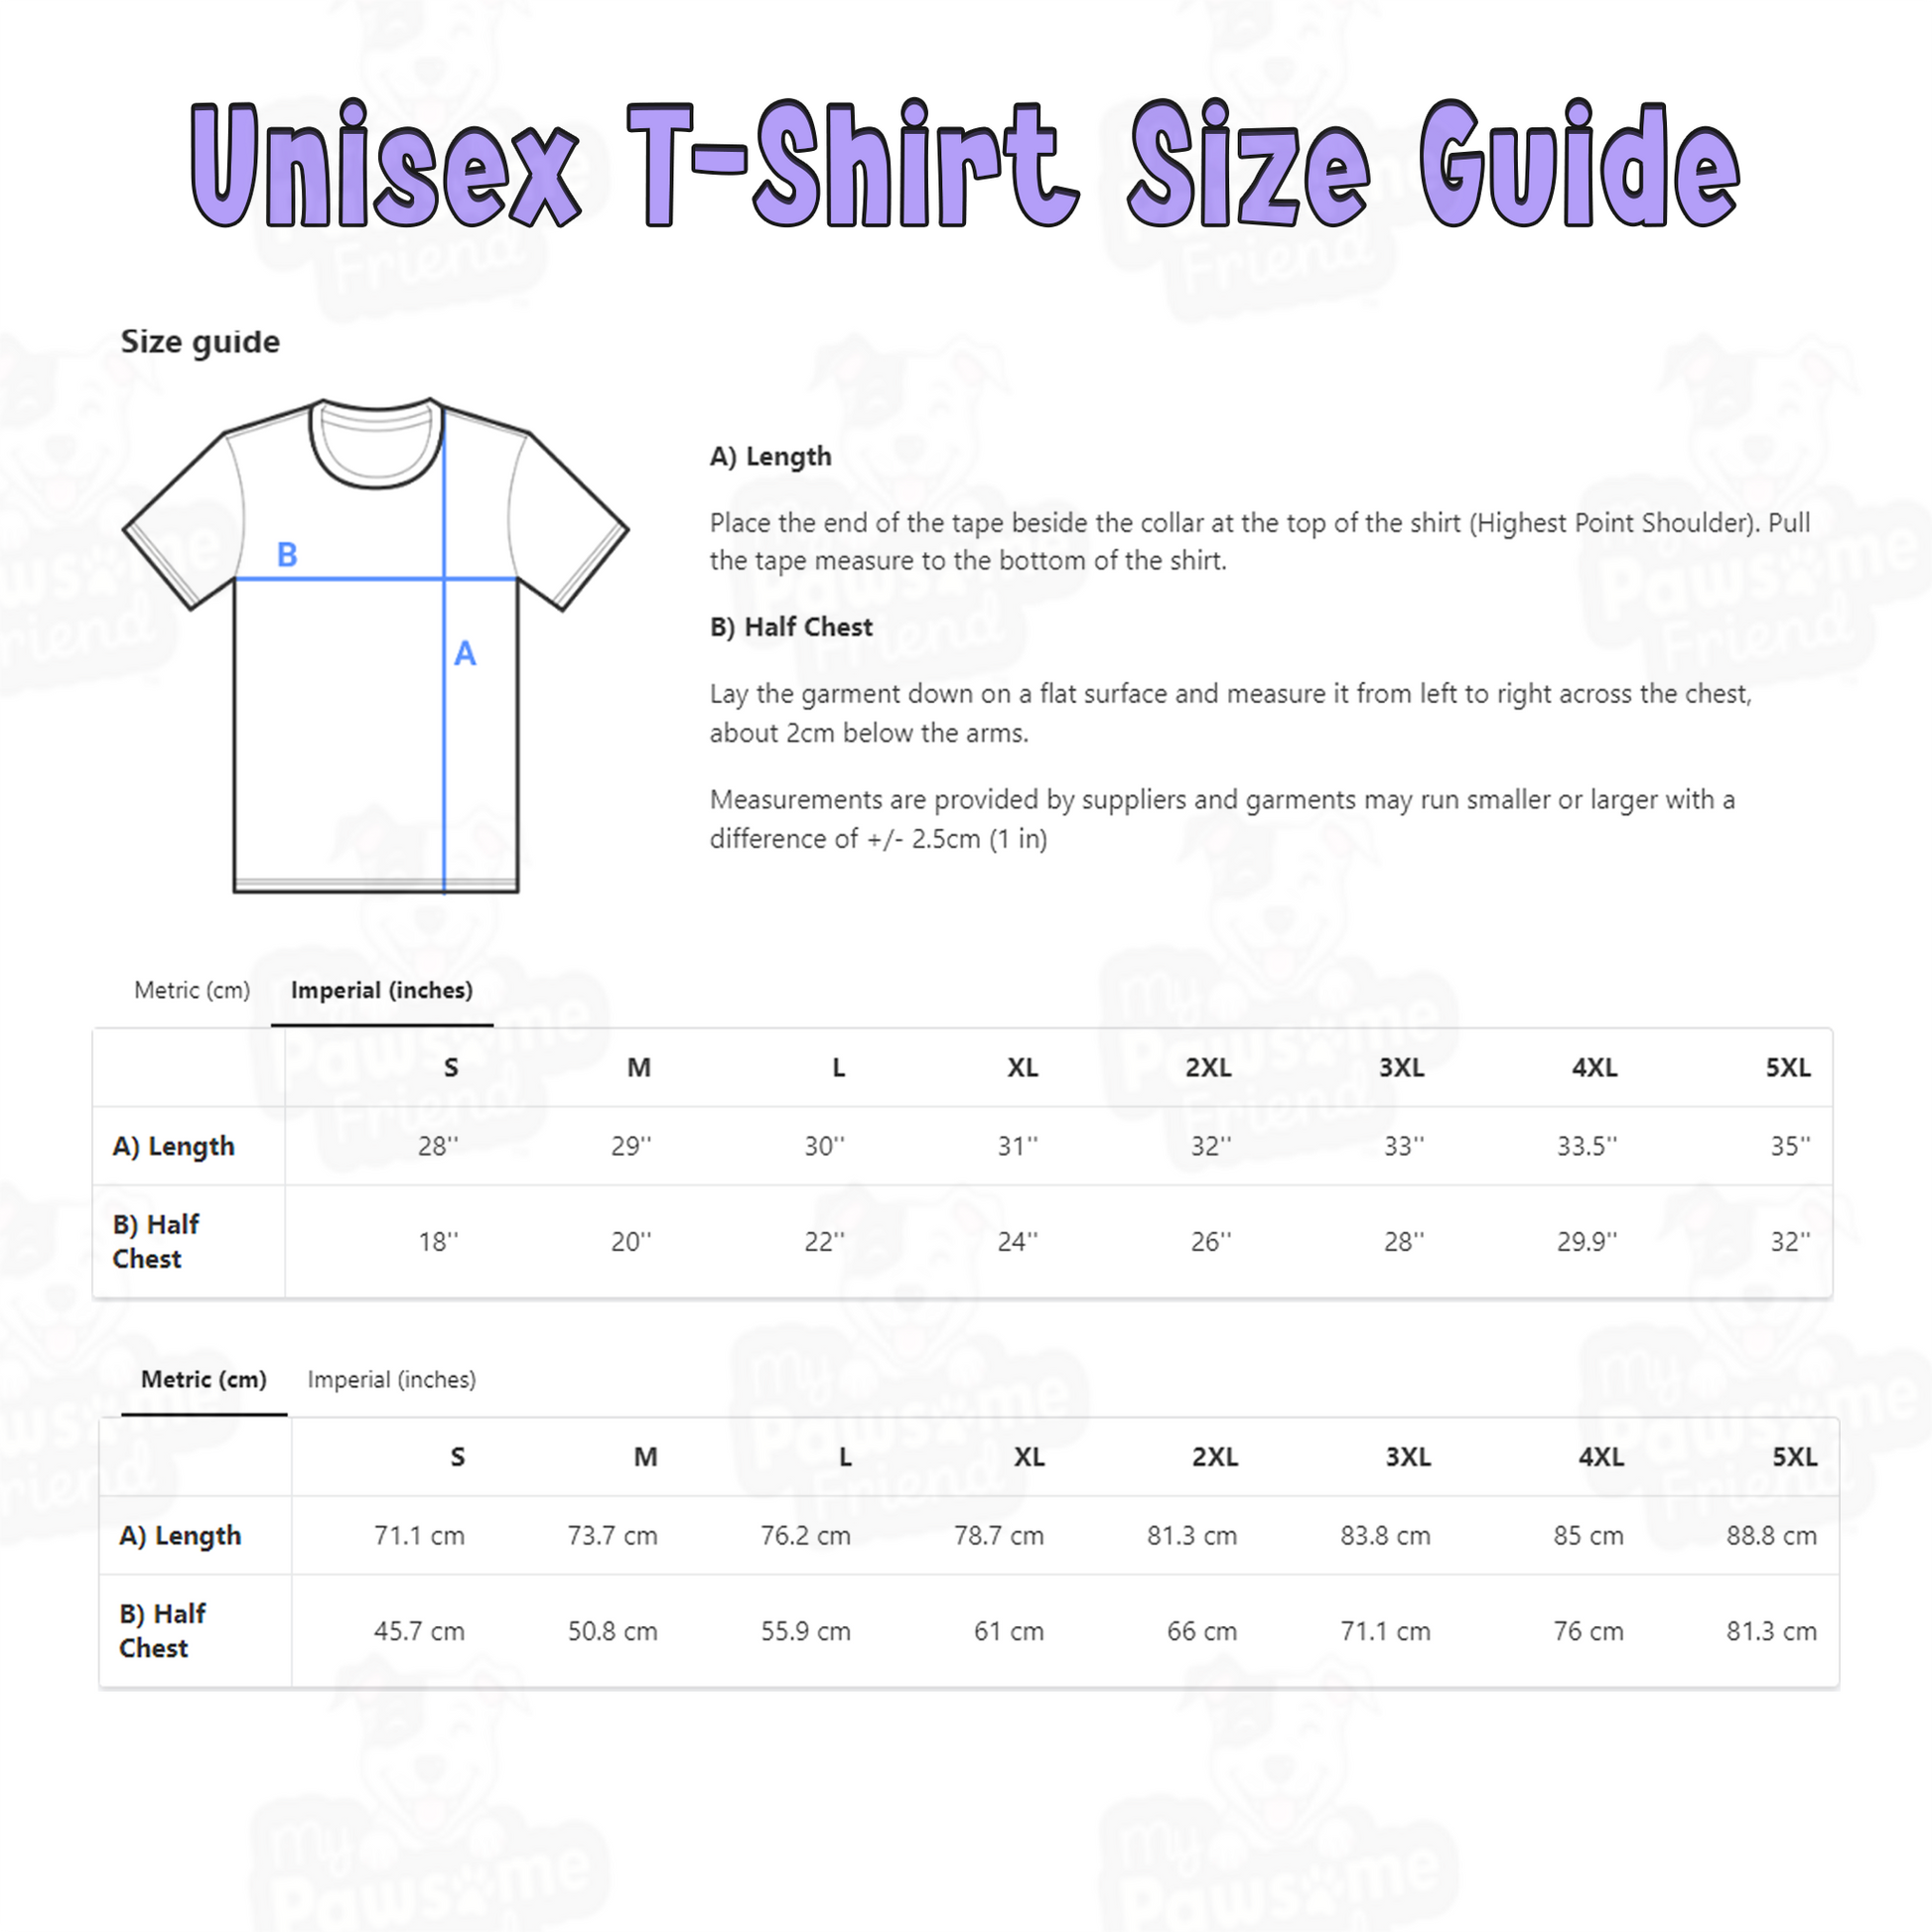 Dogs Have One Aim in Life... To Bestow Their Hearts Unisex T-shirt Size Chart